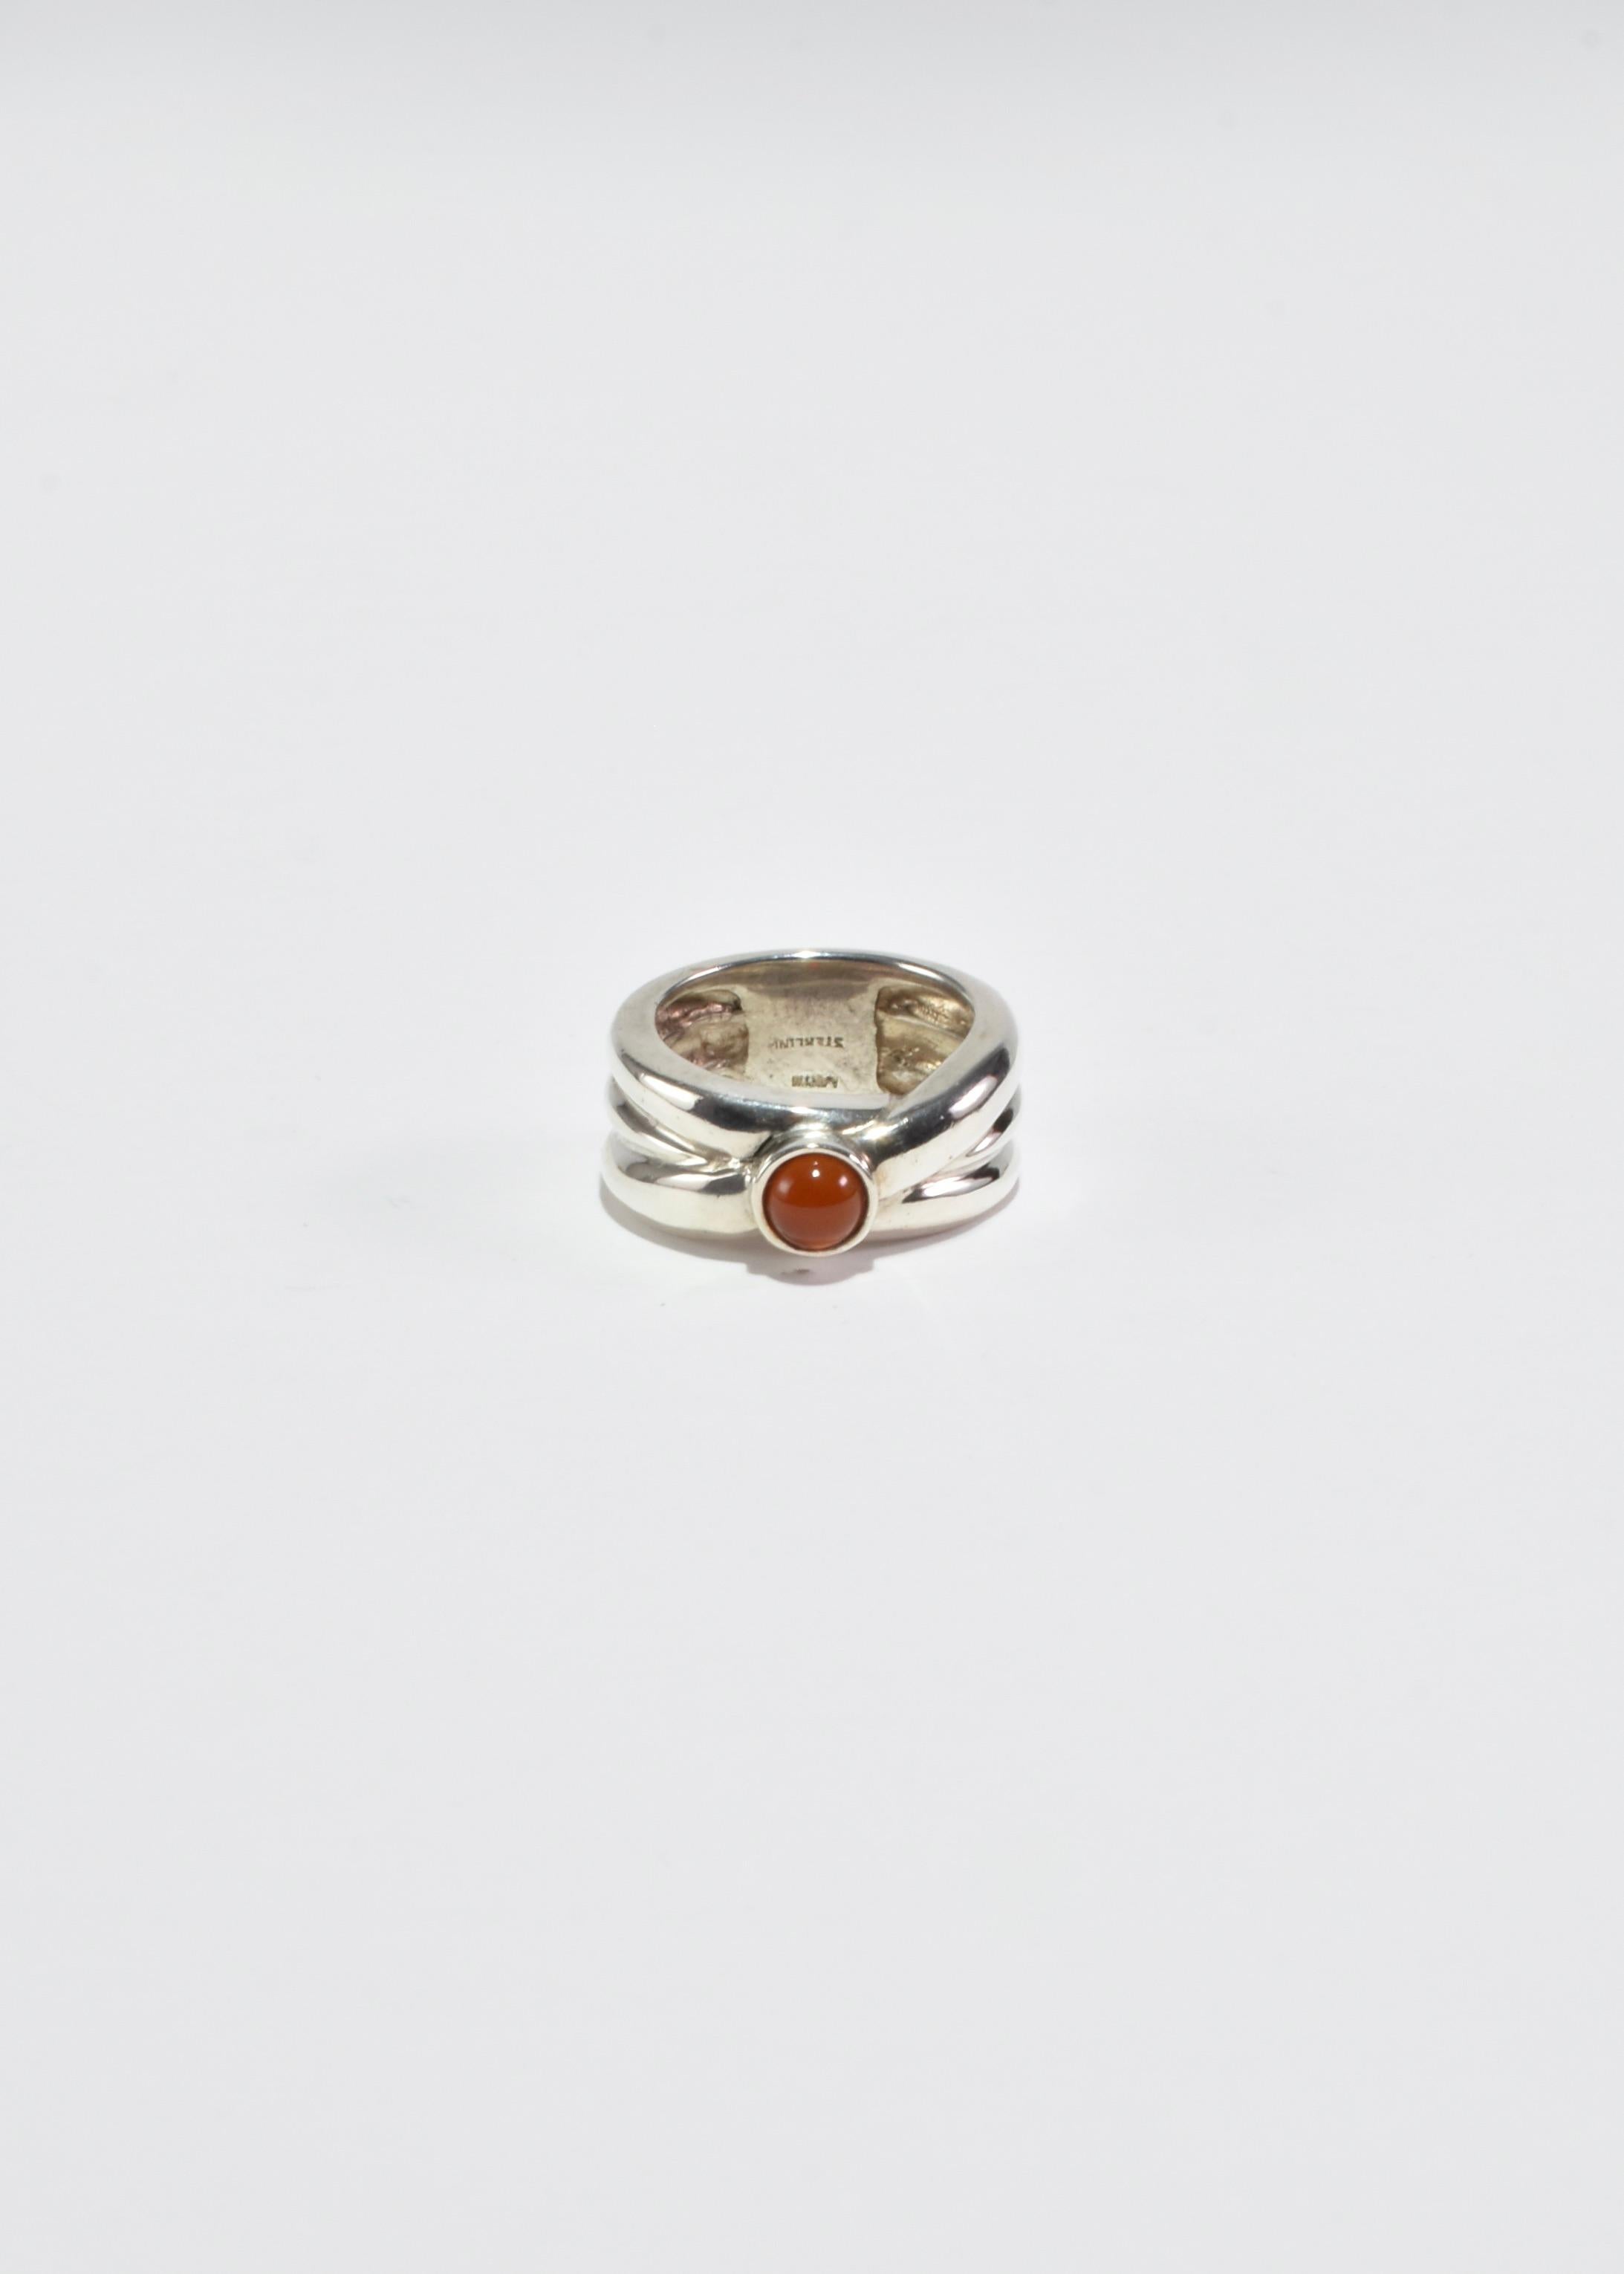 Vintage silver ring with a round carnelian cabochon and ribbed detail. Stamped Sterling.

Material: Sterling silver, carnelian.